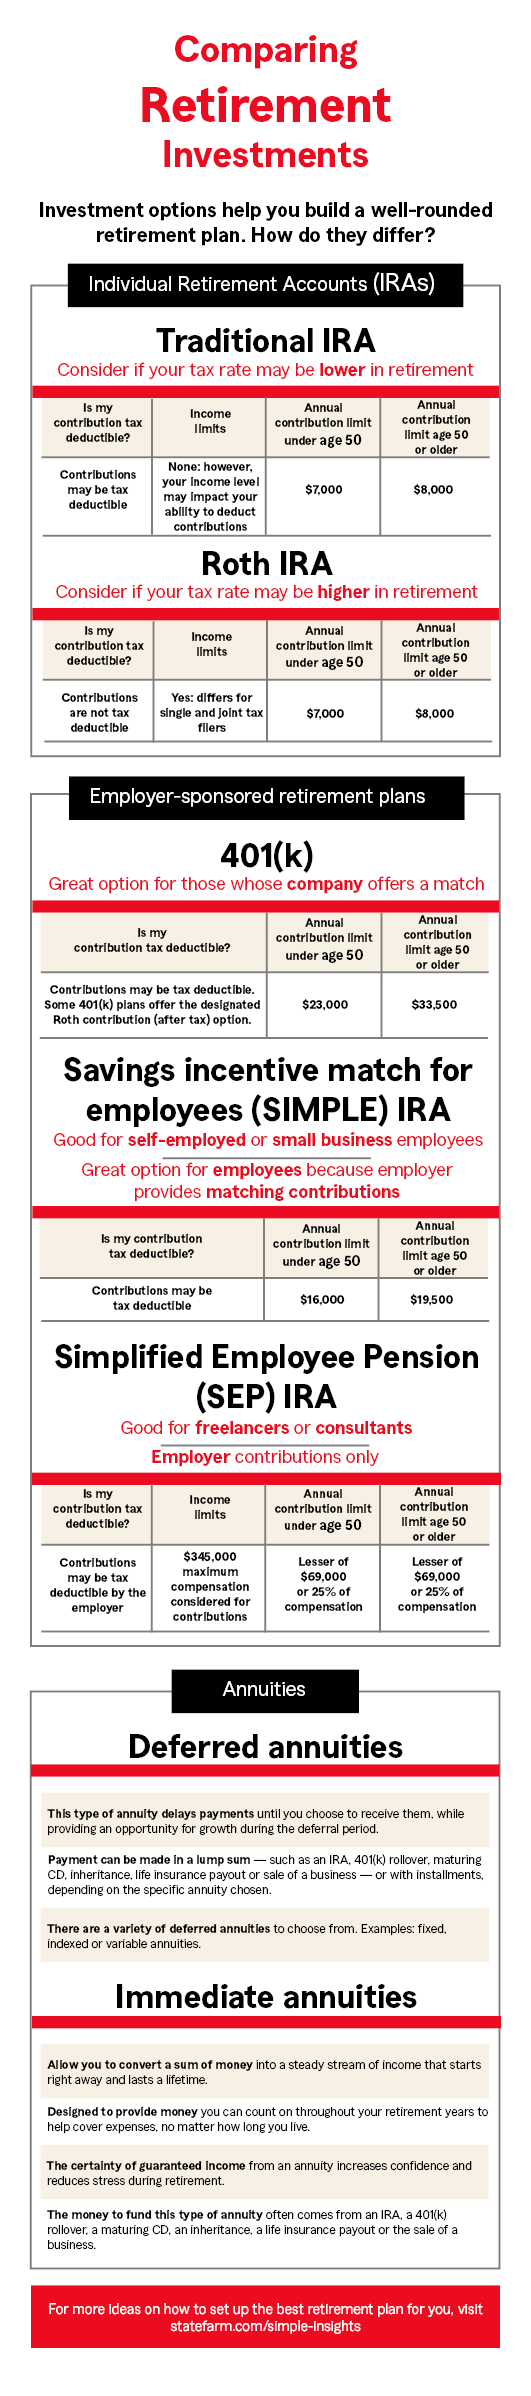 Infographic that shares seven investment options to help you build a well-rounded plan for retirement.